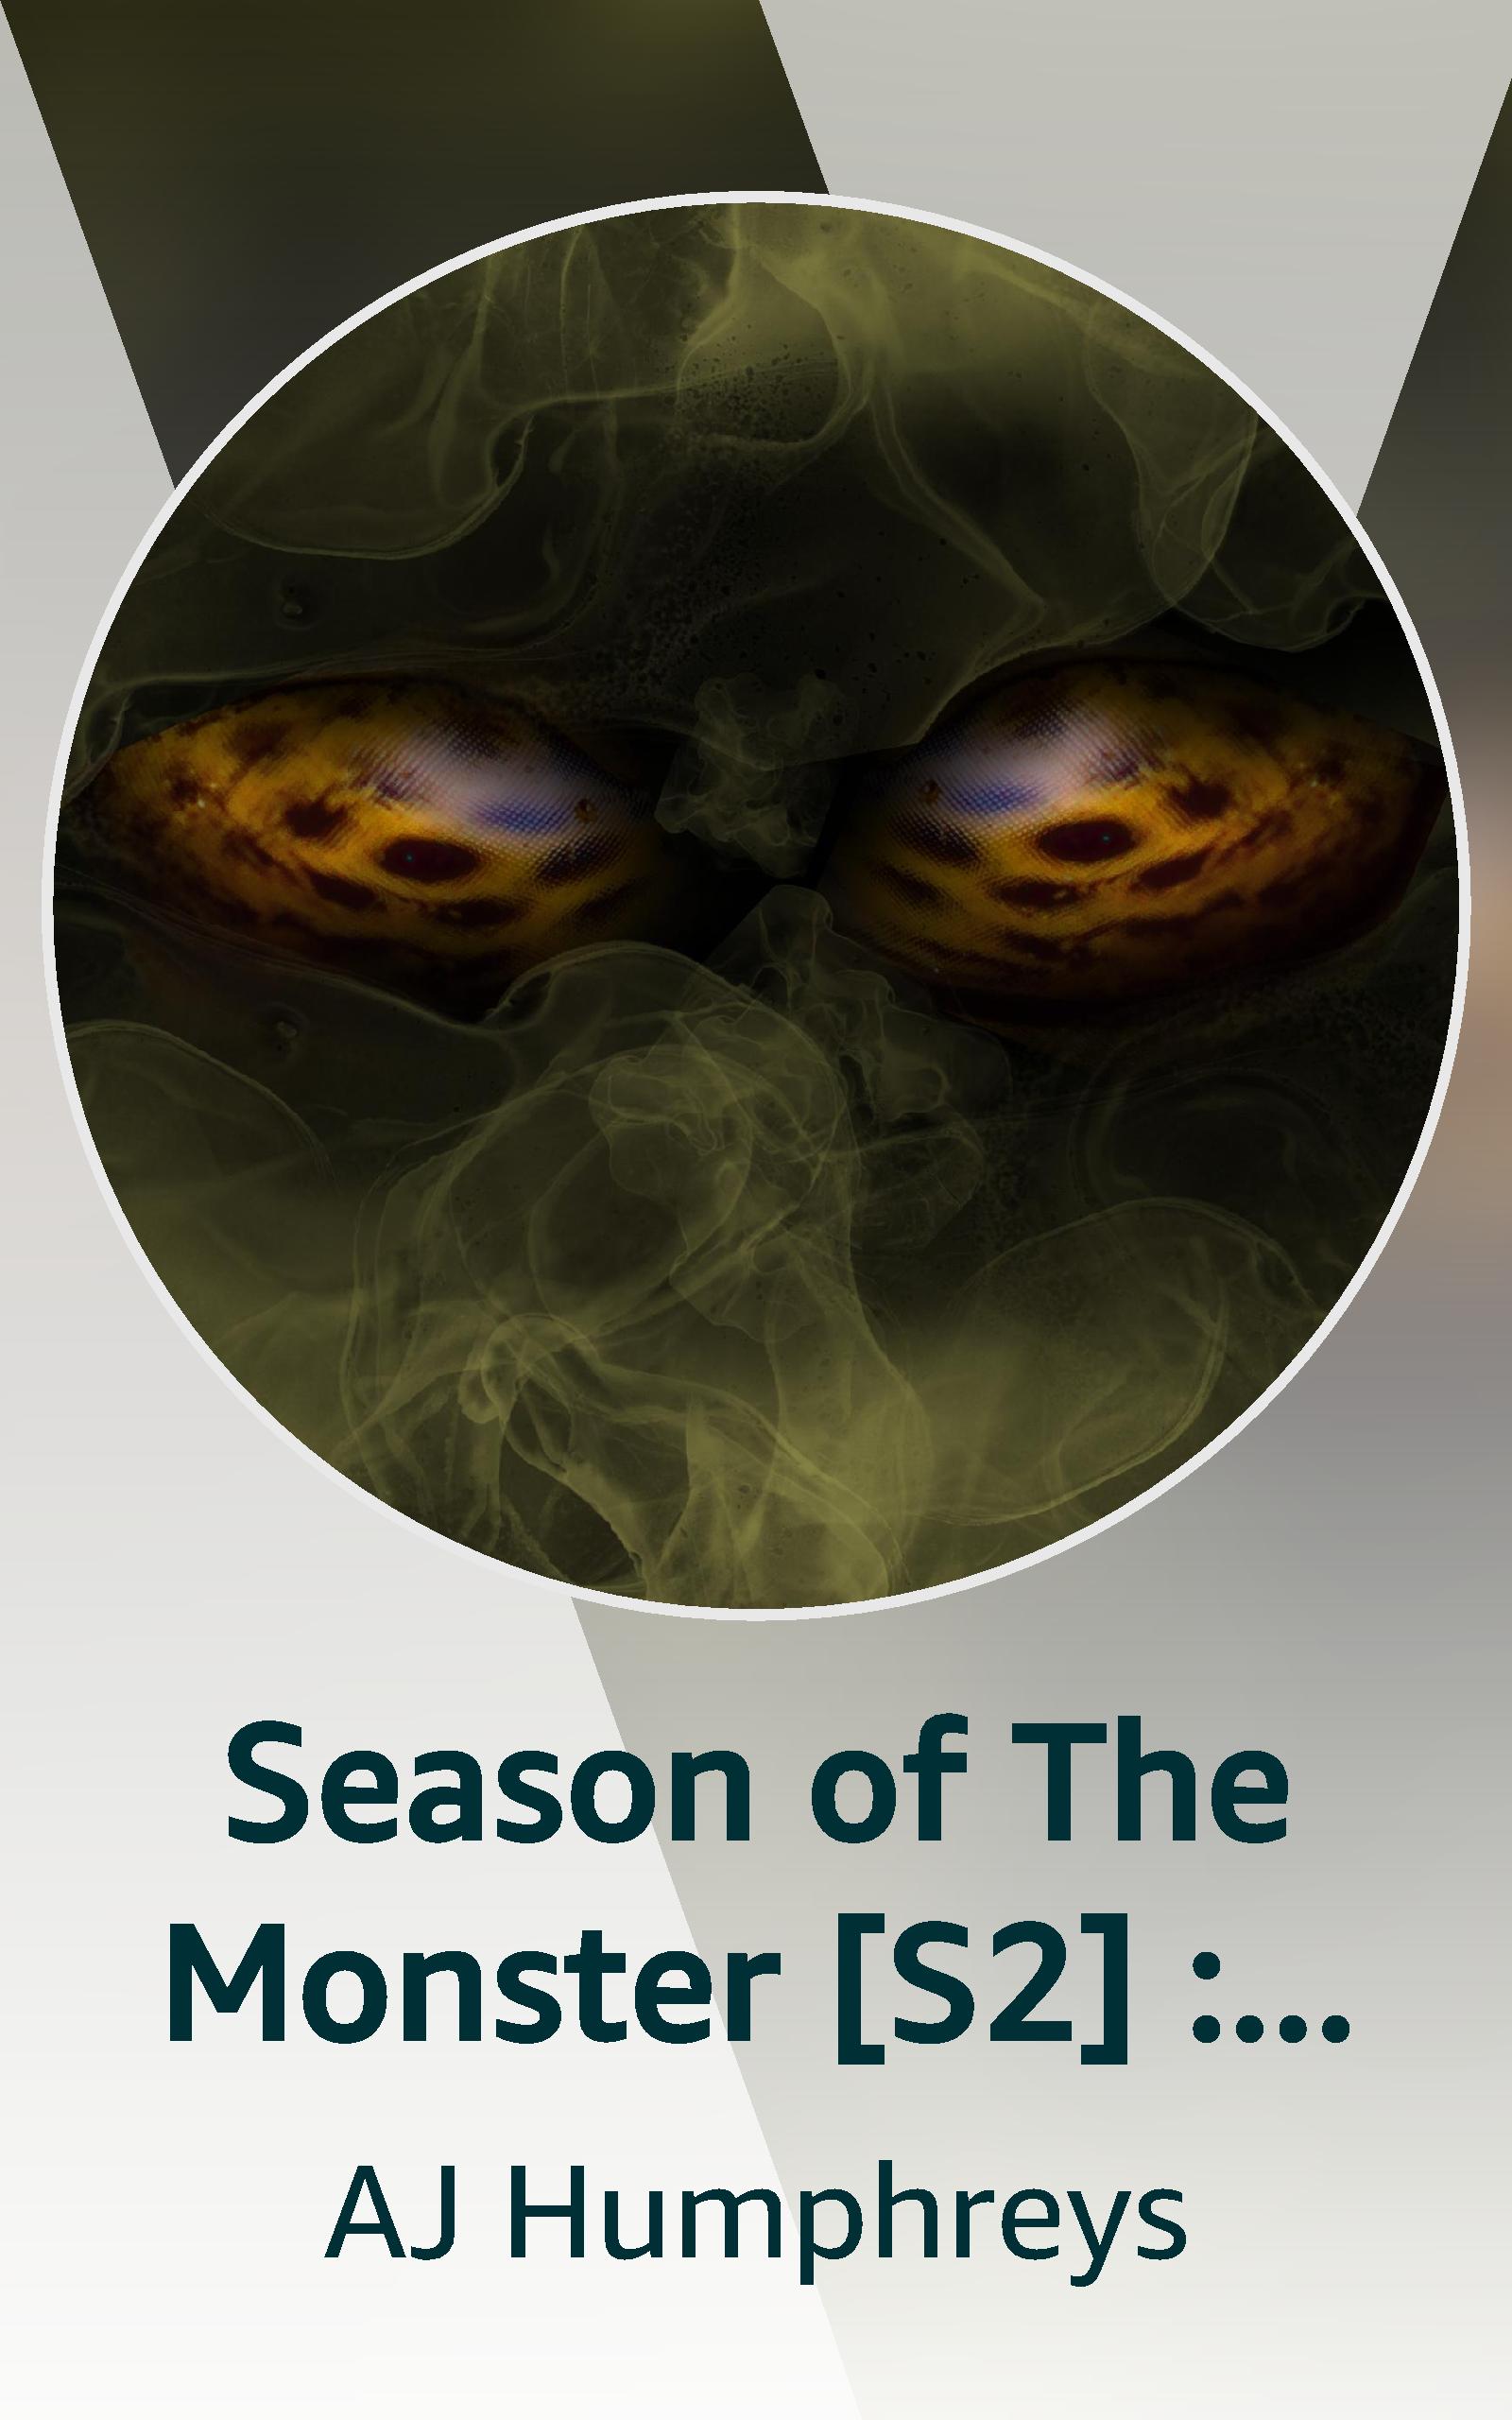 Cover image redirects to season of the monster summer by aj humphreys on kindle vella